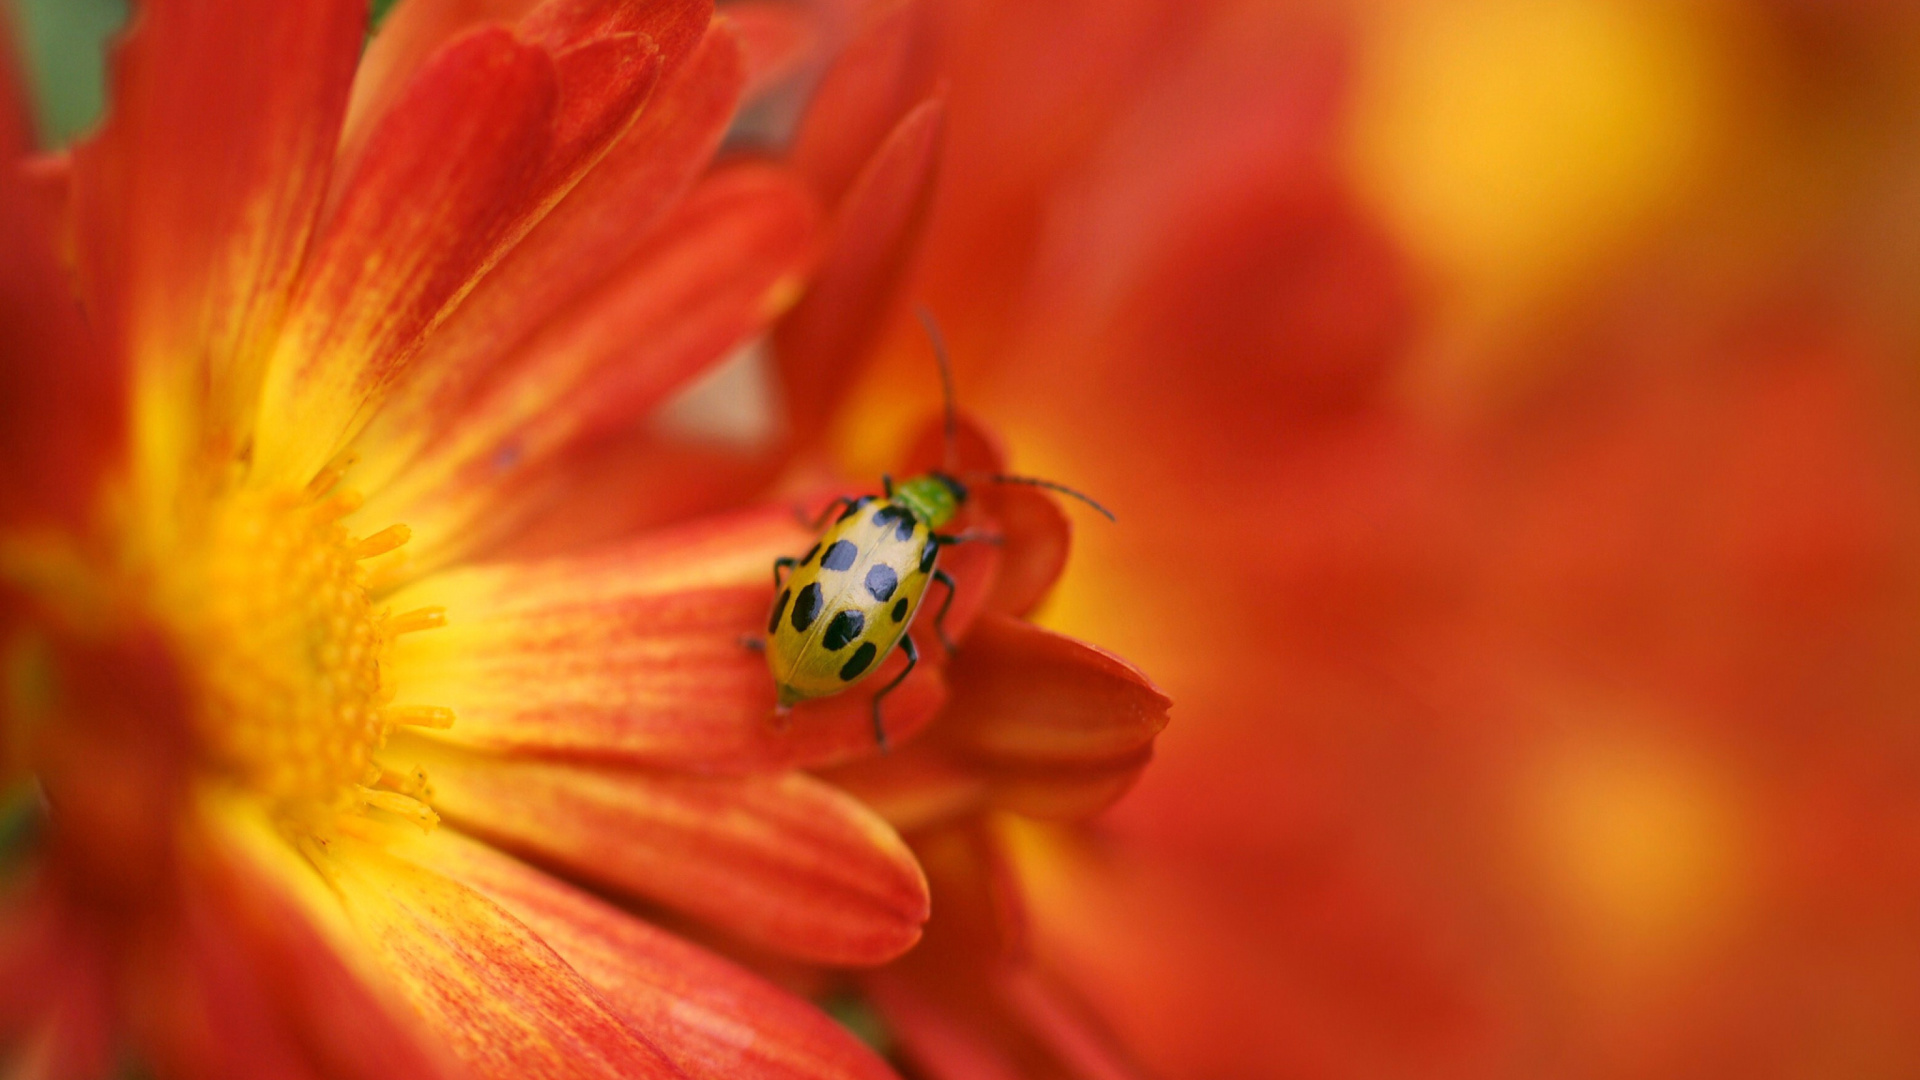 Red Flowers and Ladybug wallpaper 1920x1080